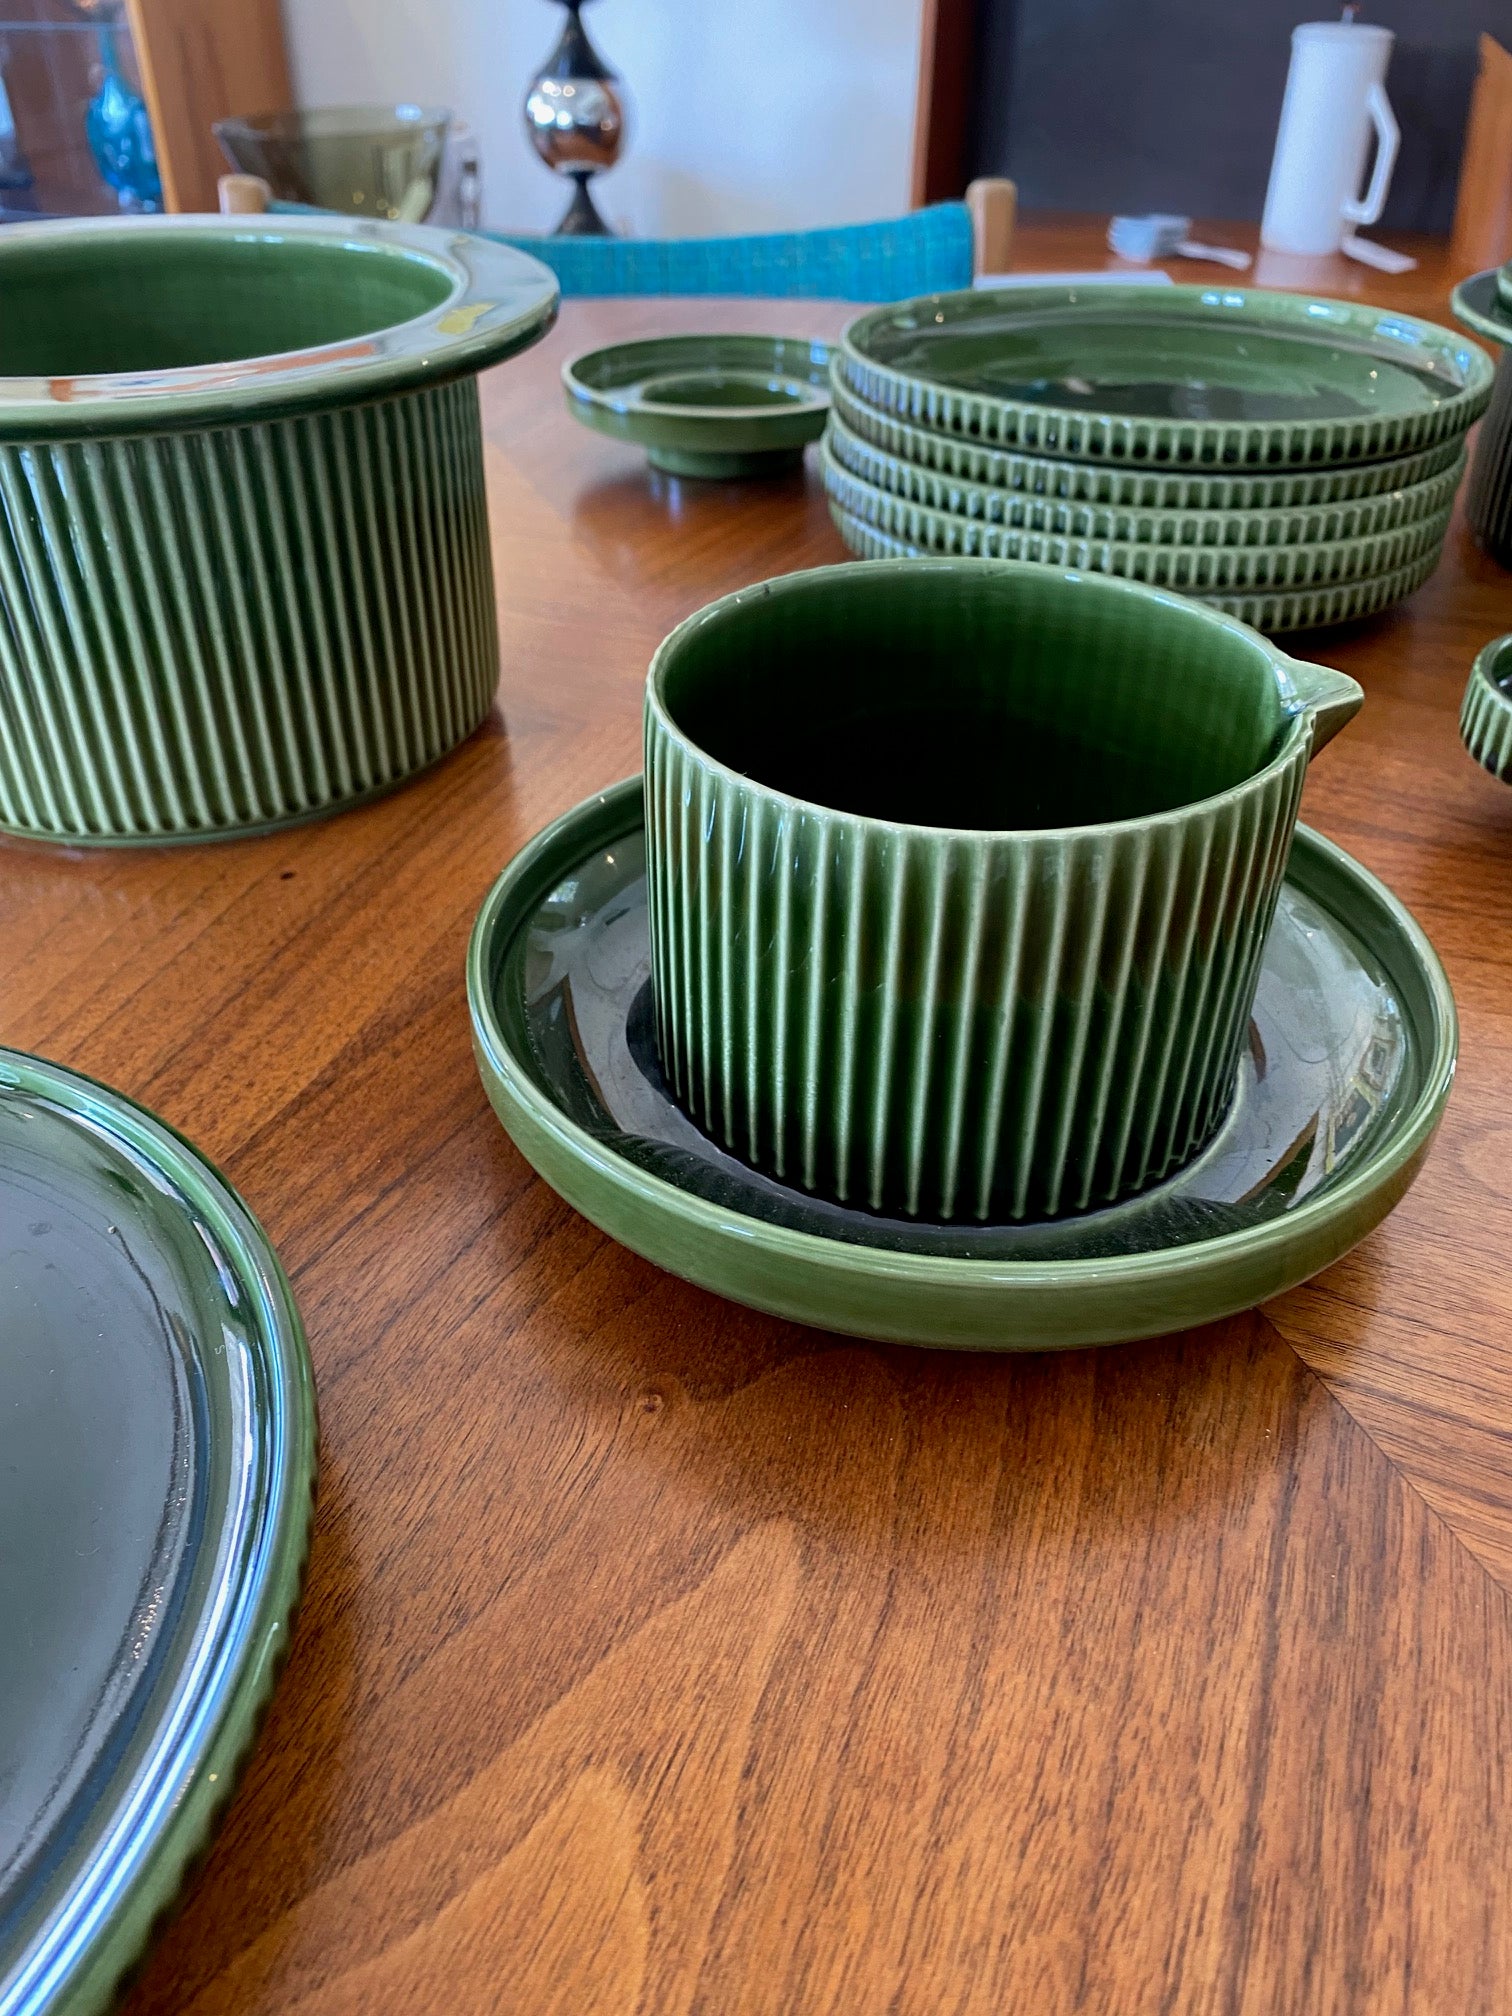 Set of mid-century pottery designed by Fokke Hamming for De Driehoek. Dark forest green glaze with a modern striated design. Made in Huizen in Holland, sauce boat- Cook Street Vintage